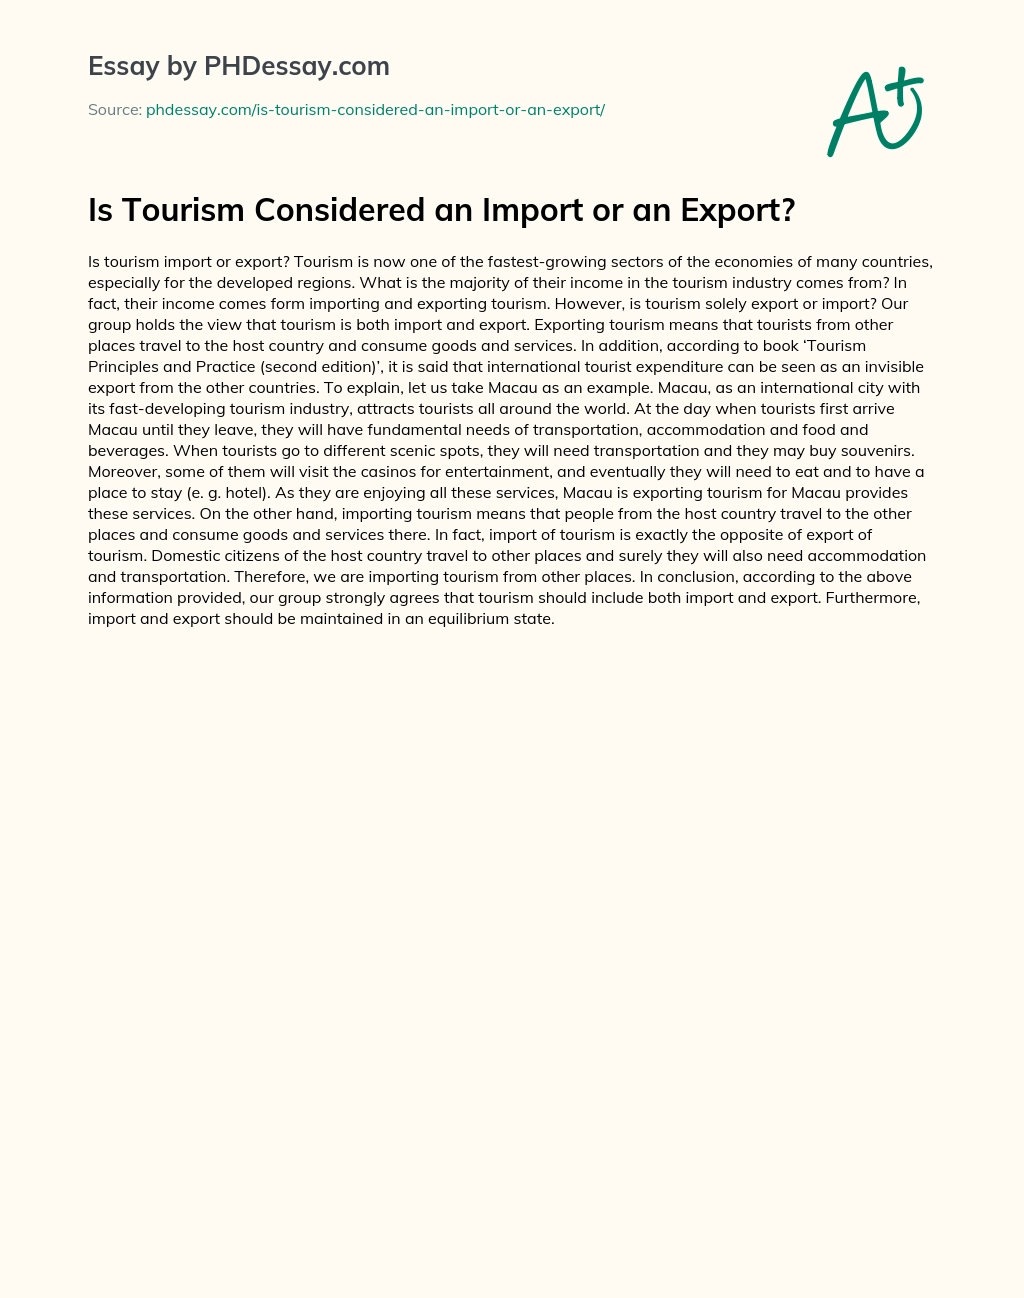 Is Tourism Considered an Import or an Export? essay